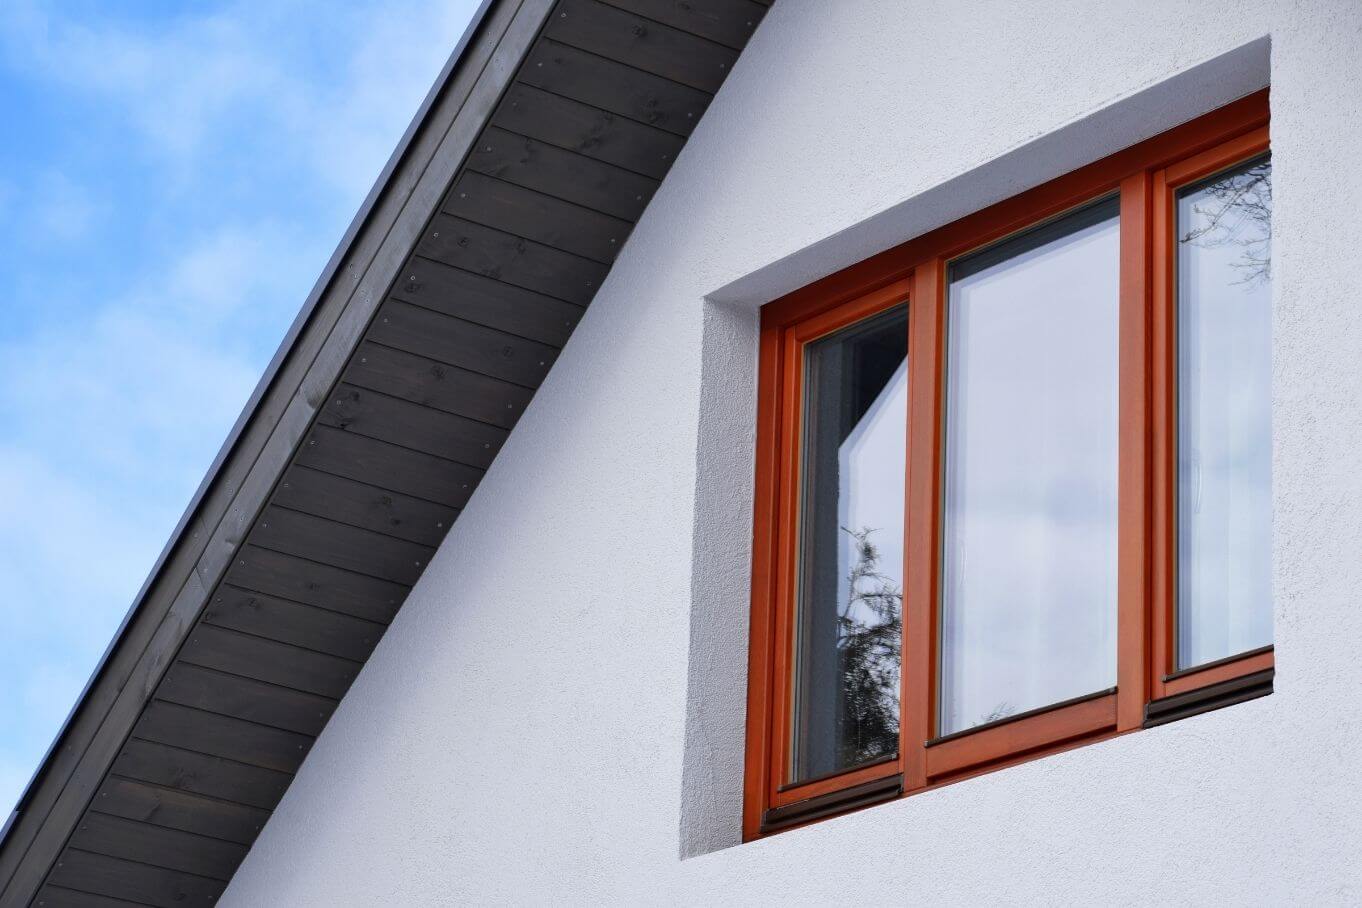 How to Clean and Maintain Wooden Window Frames